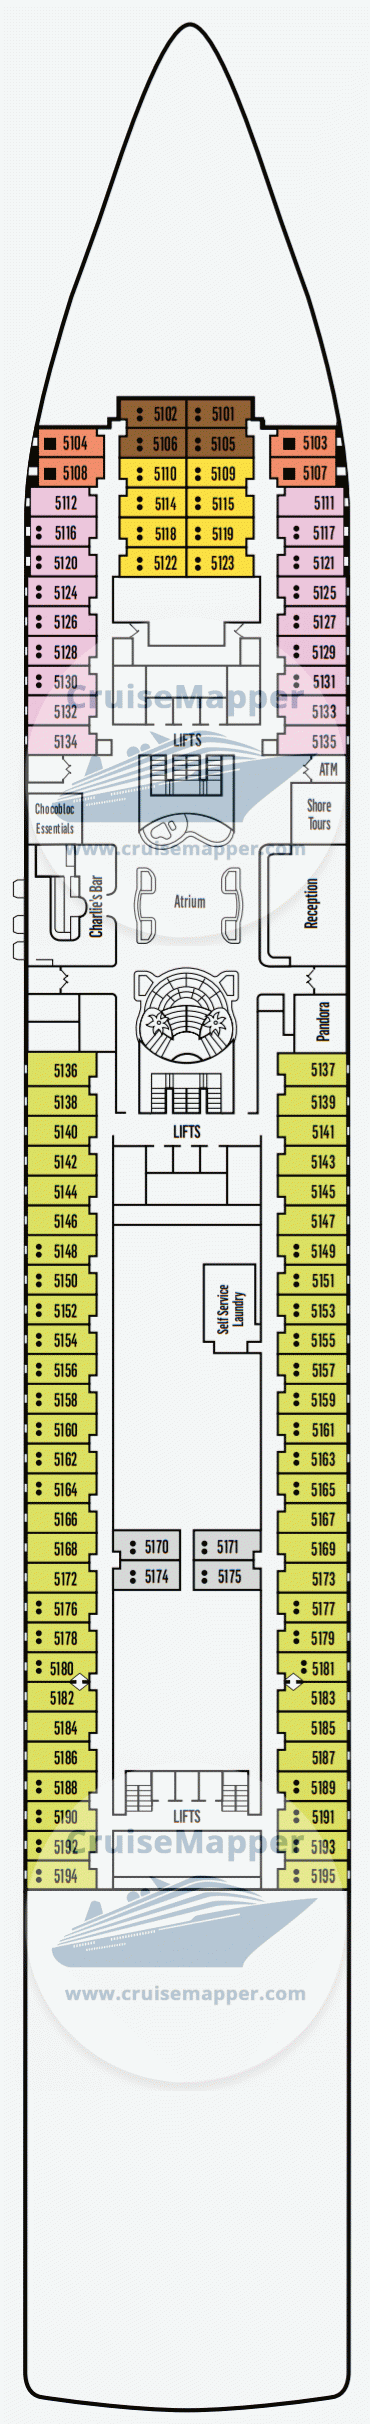 cruise ship ambience deck plans